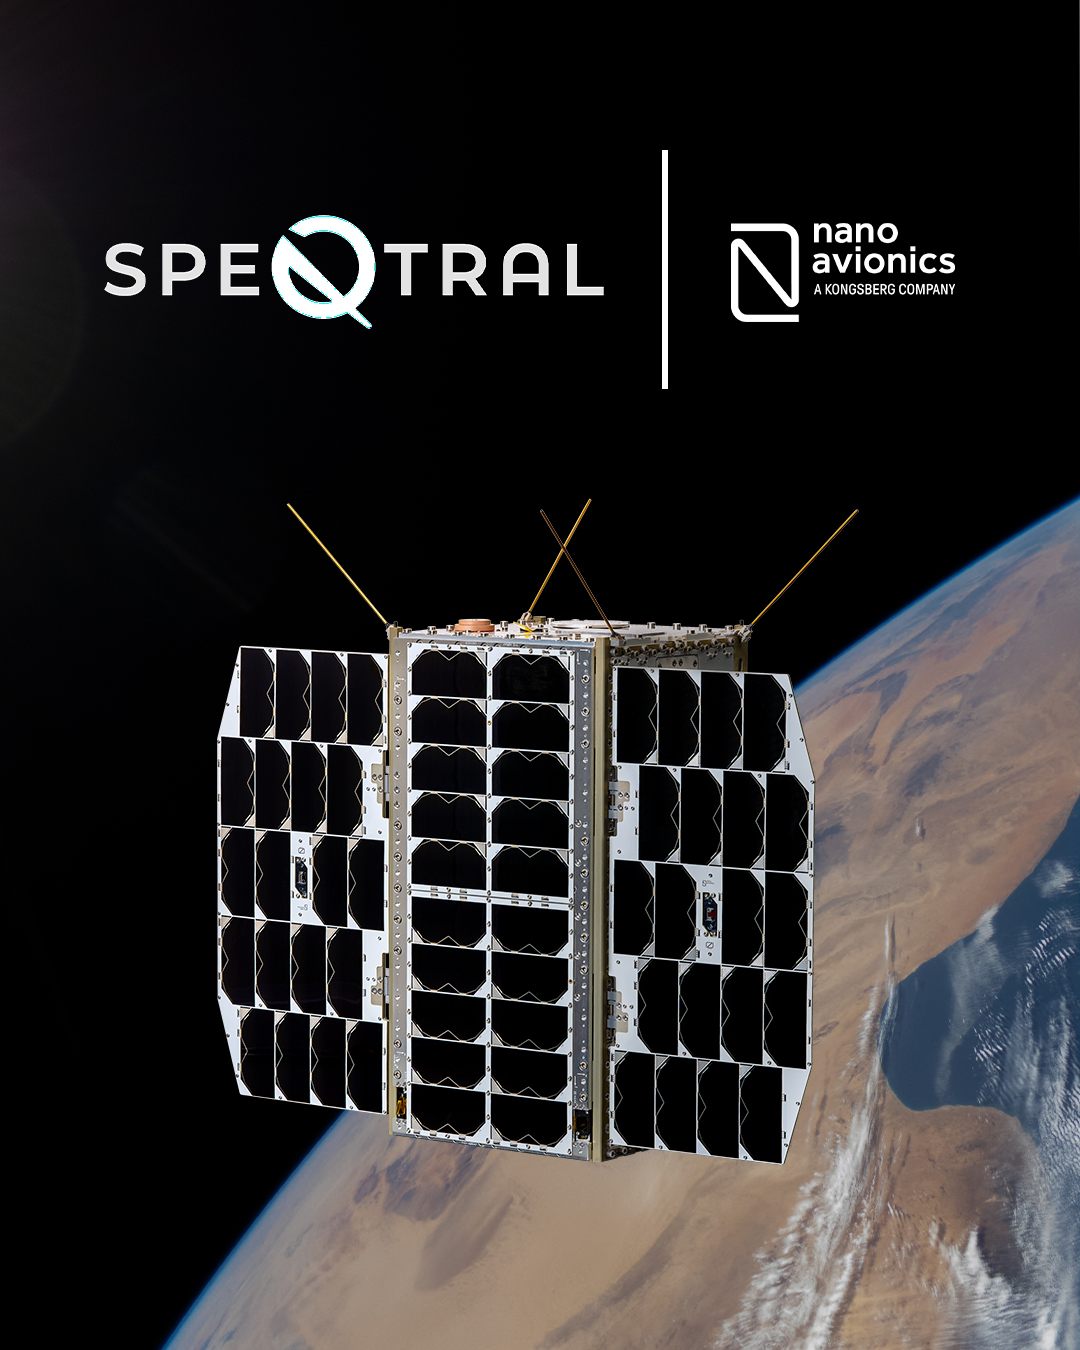 SpeQtral